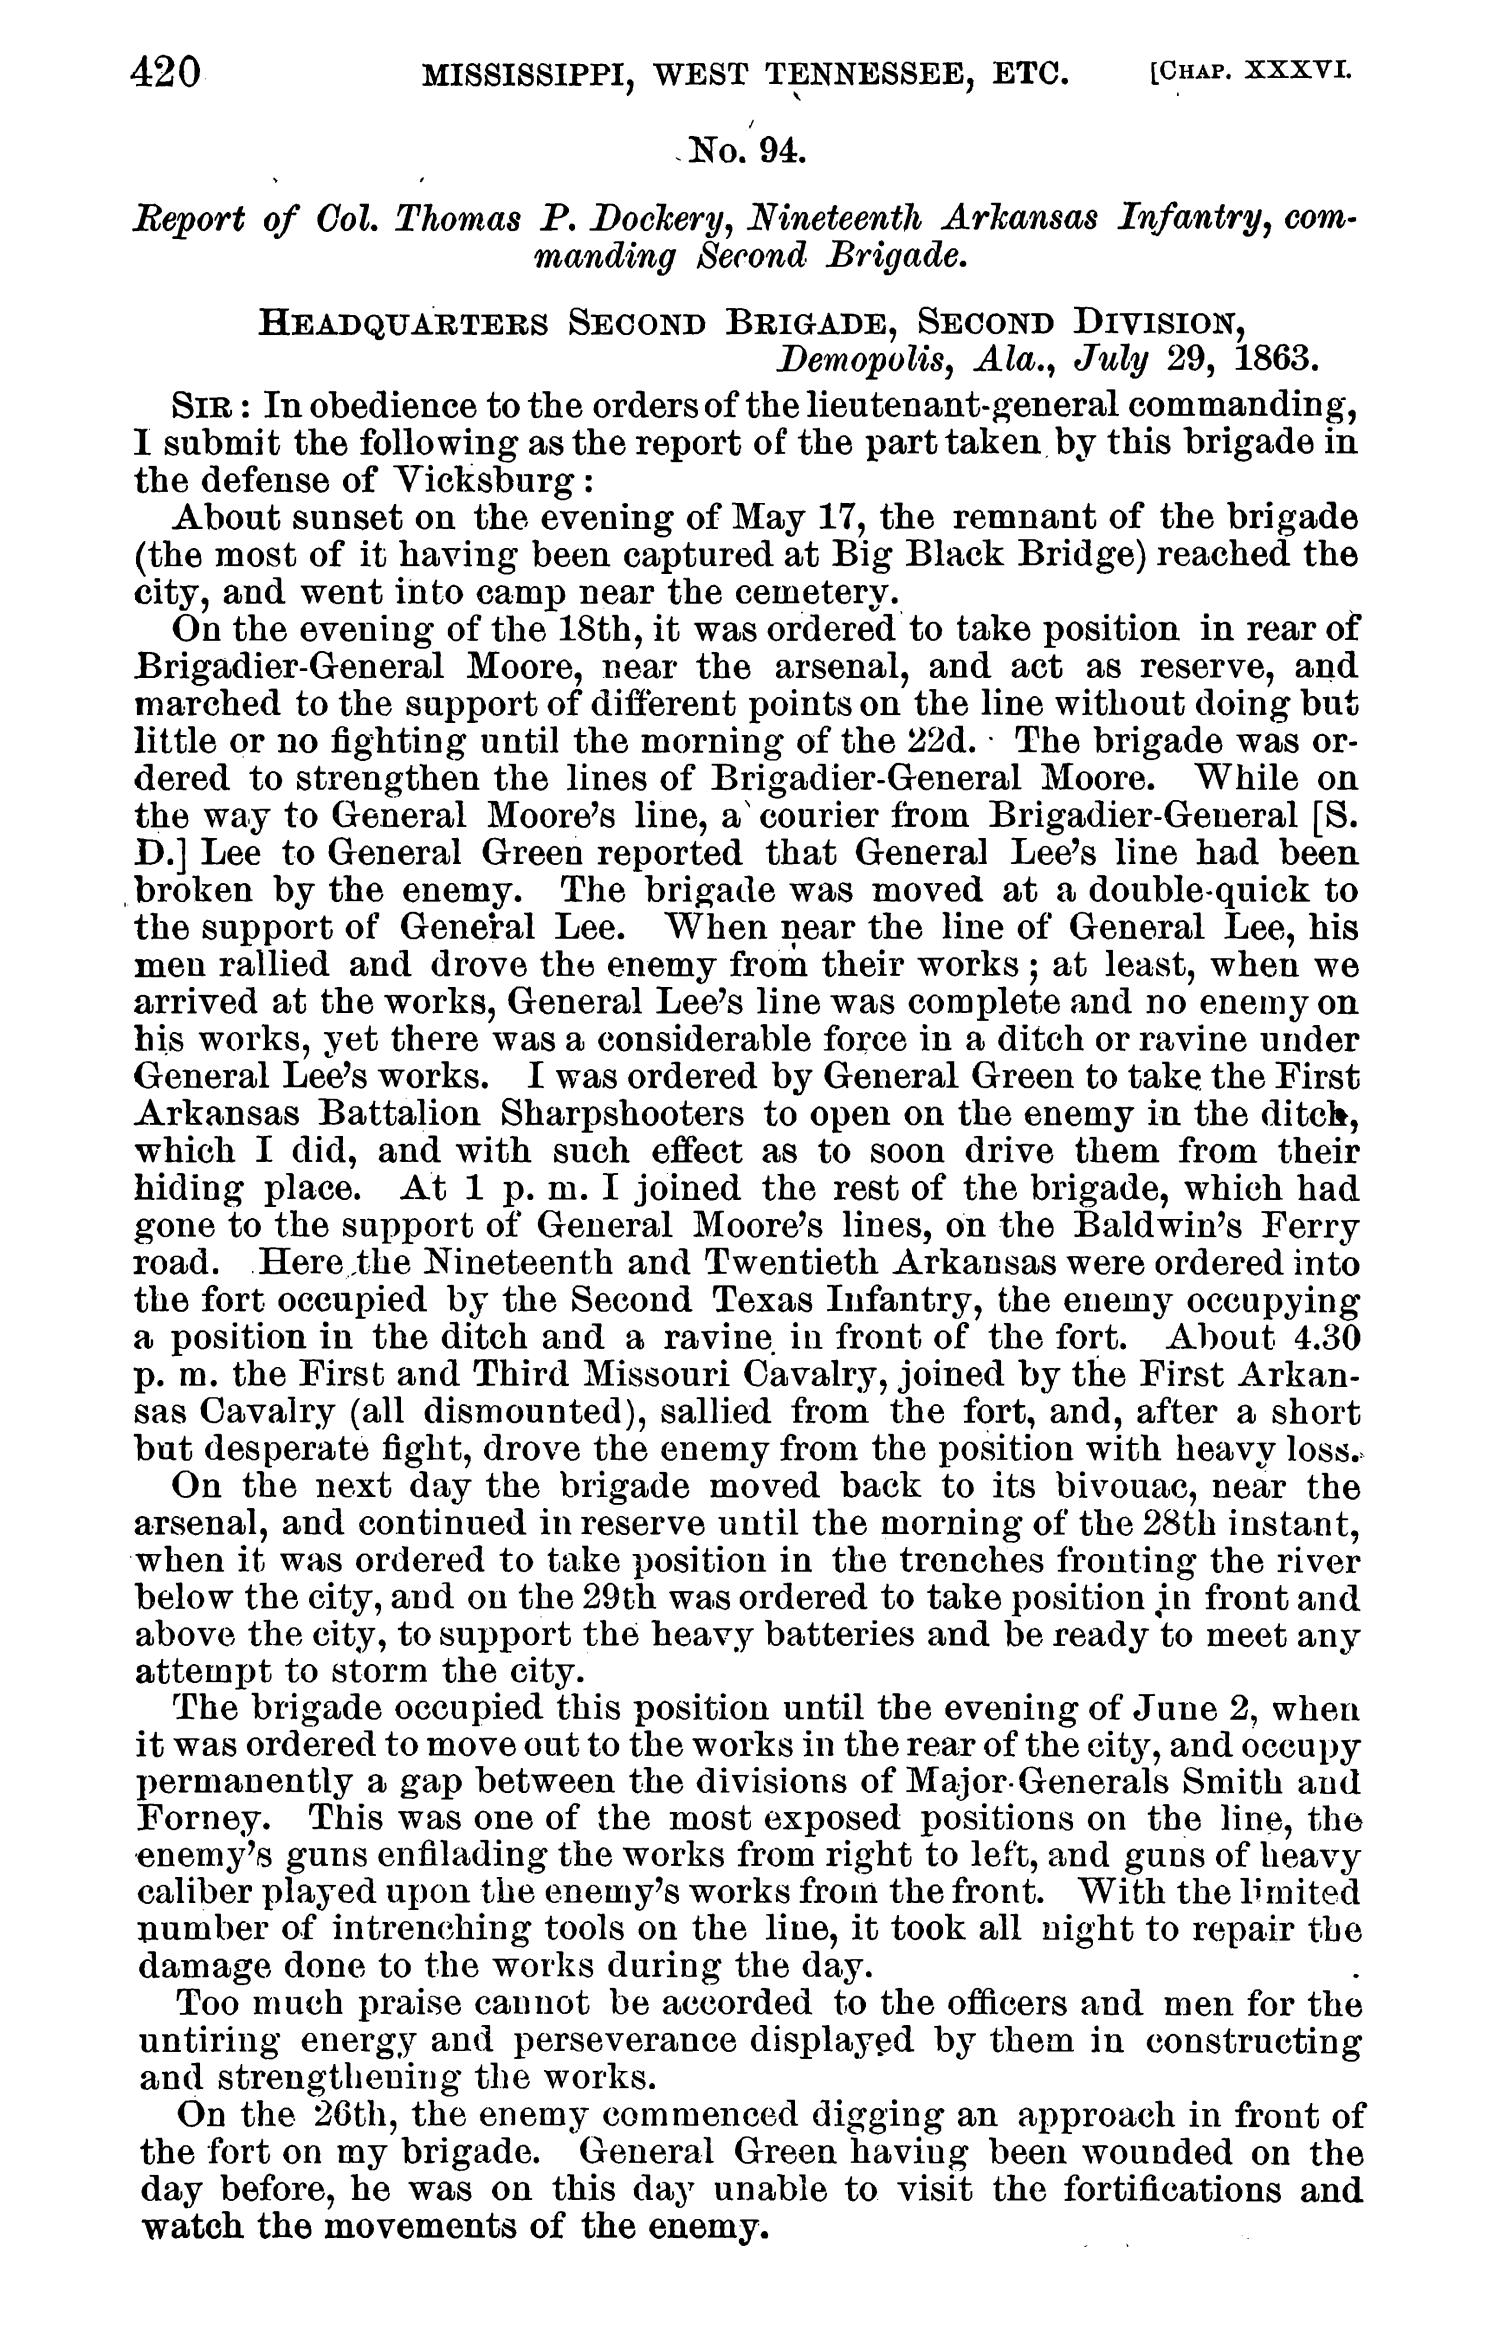 The War of the Rebellion: A Compilation of the Official Records of the Union And Confederate Armies. Series 1, Volume 24, In Three Parts. Part 2, Reports.
                                                
                                                    420
                                                